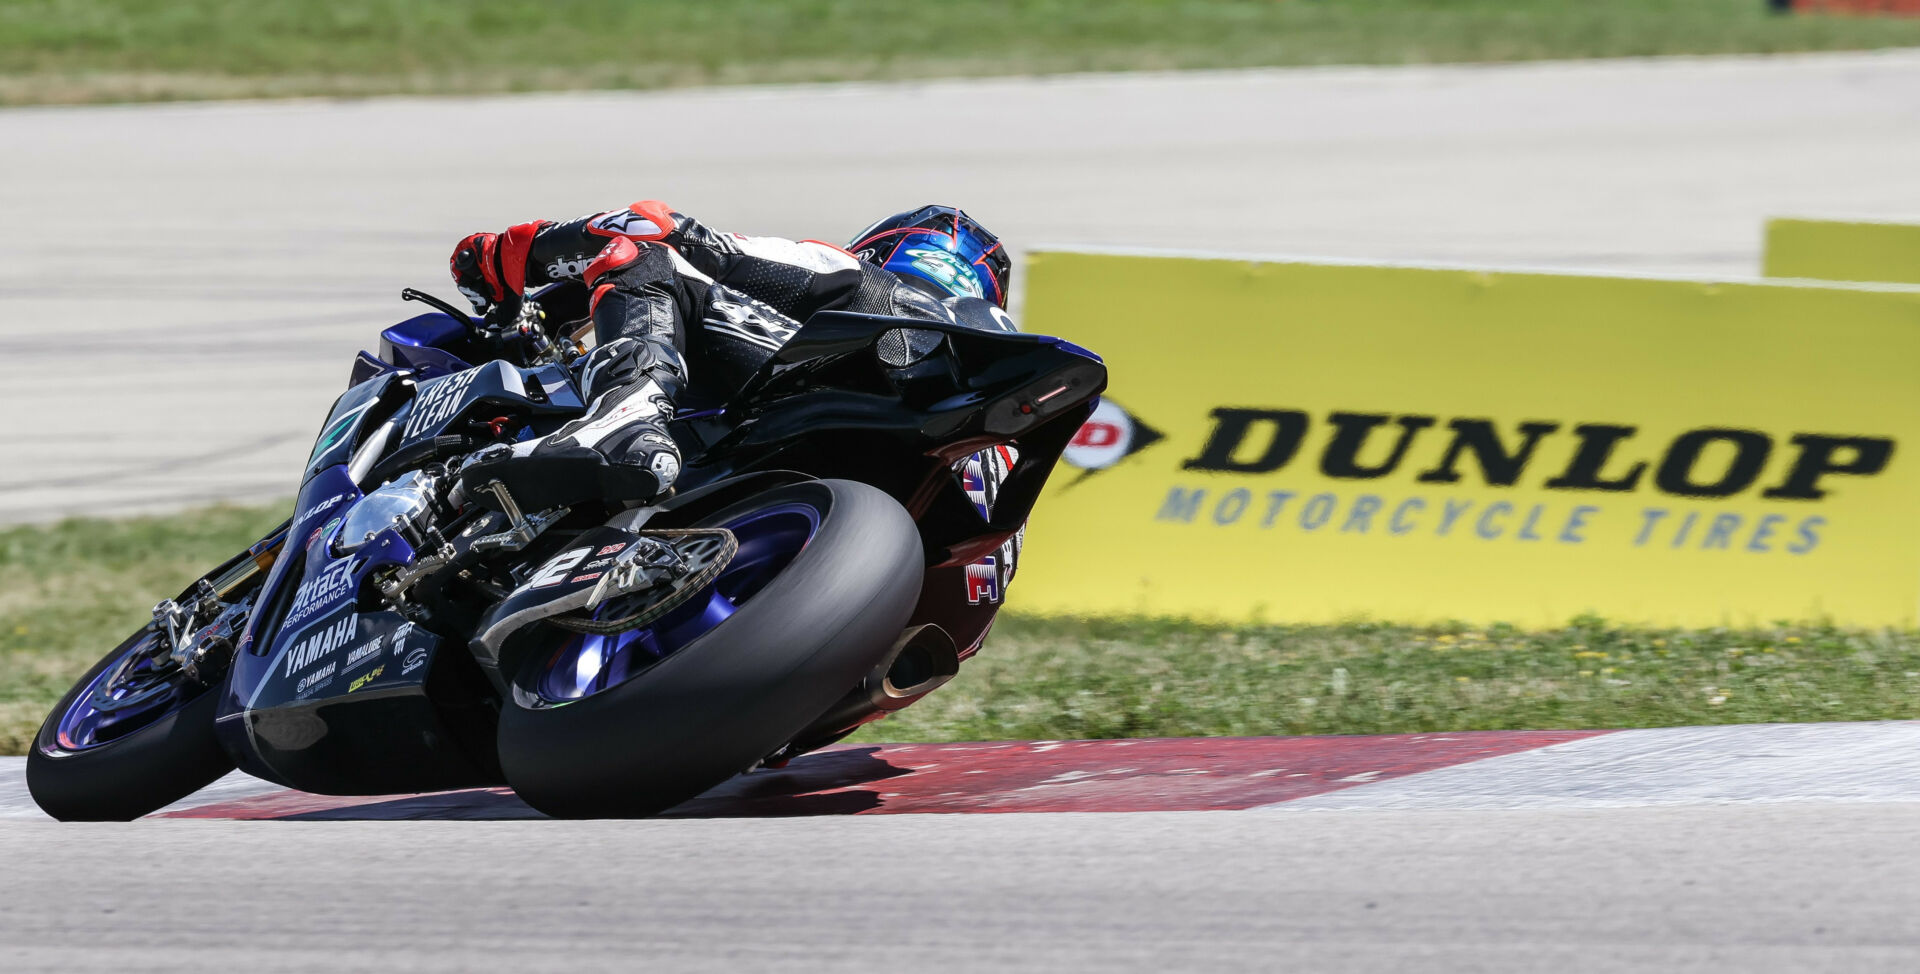 2021 MotoAmerica Superbike Champion Jake Gagne in action at Pittsburgh International Race Complex in 2021. Photo by Brian J. Nelson.